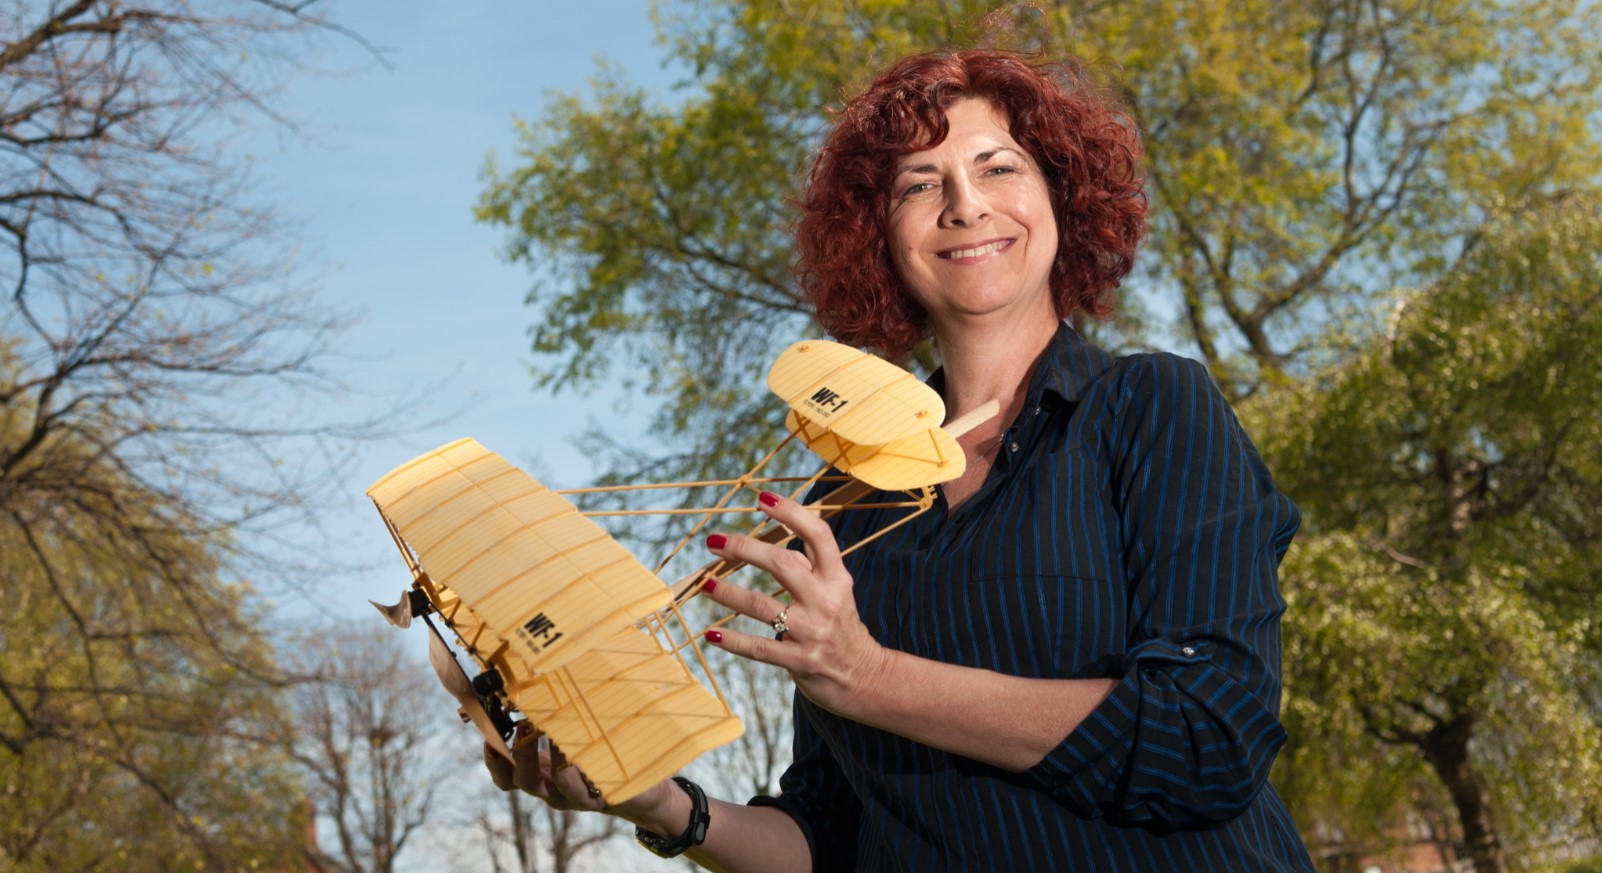 Dr Dani Soban holder model aircraft, standing in a park with trees in background